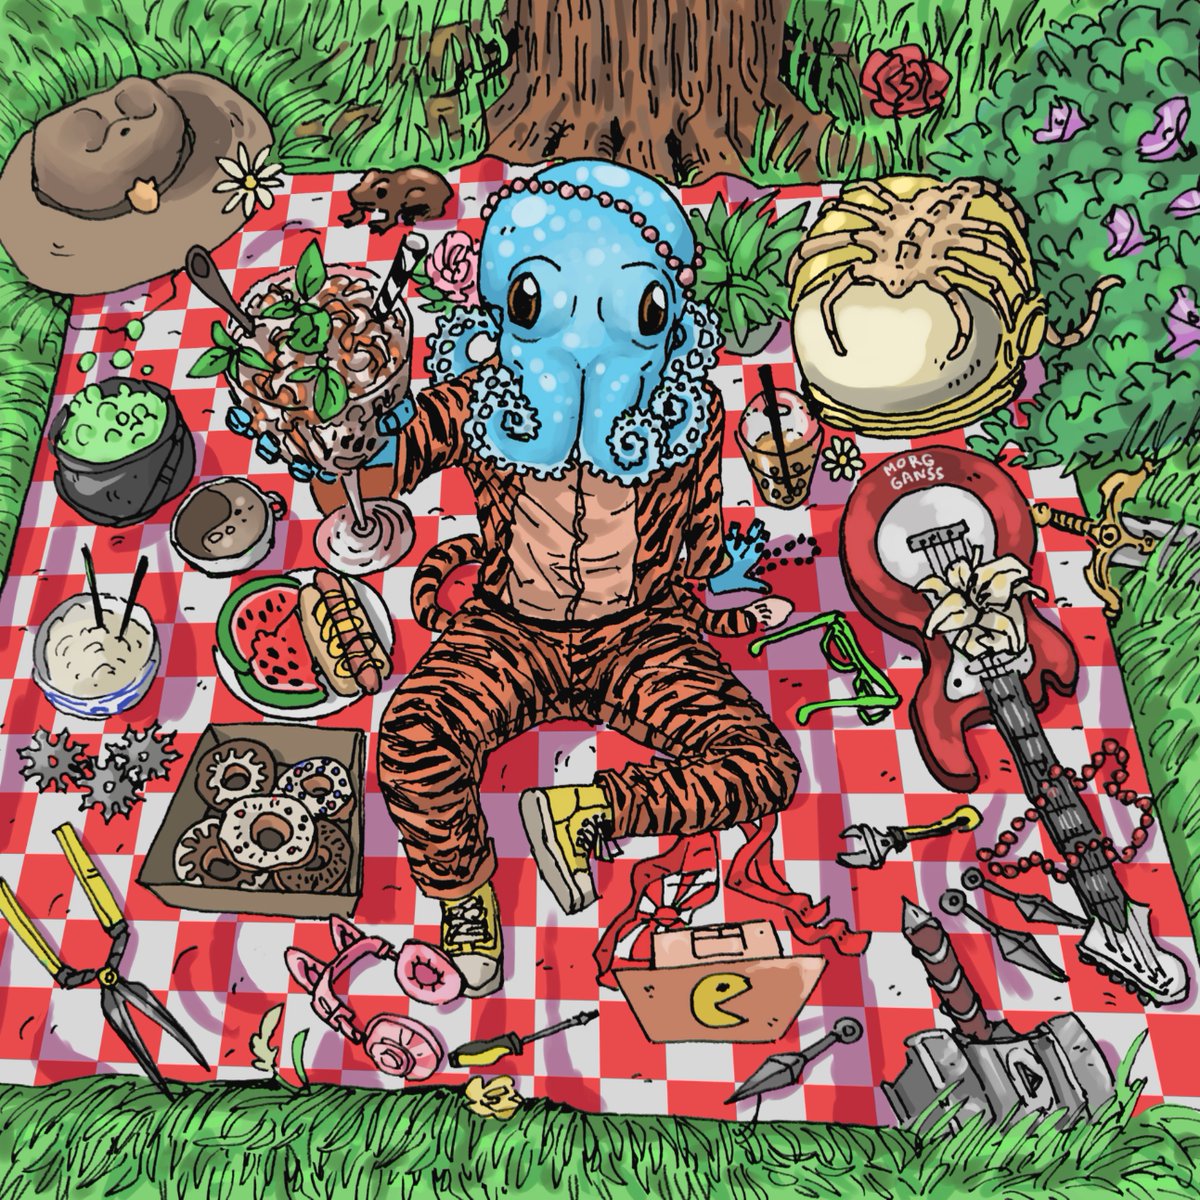 🪂 MAY 2024 HOLDERS AIRDROP 🪂 GM, peeps! Check your wallets, because your airdrop has arrived! Find joy in the little things, and celebrate spring's new beginnings and blossoming hopes. Octo Picnic was crafted by the exceptional artist @MorgGansss 👌 Thank you for your